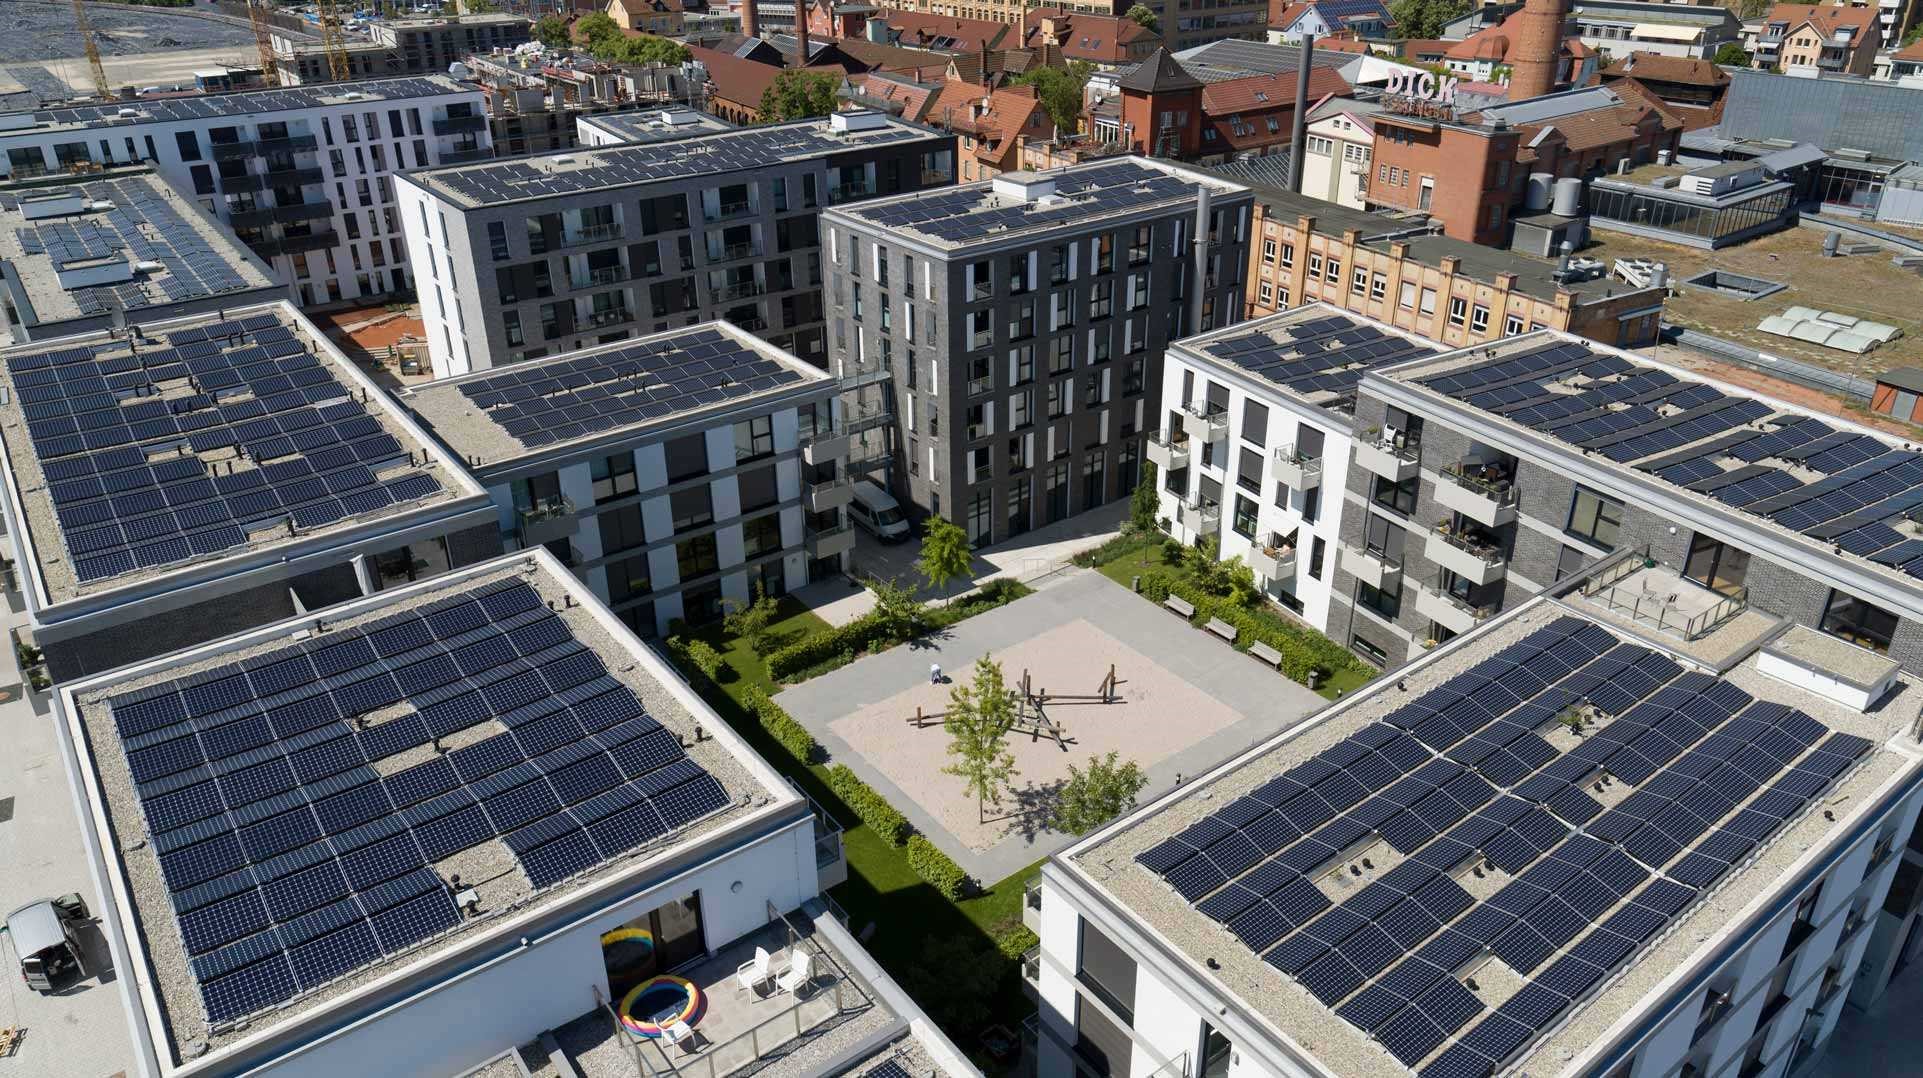 An aerial view shows the photovoltaics installed on the rooftops of Neue Weststadt buildings | Nw_Luftbild_Innenhof-Bela 